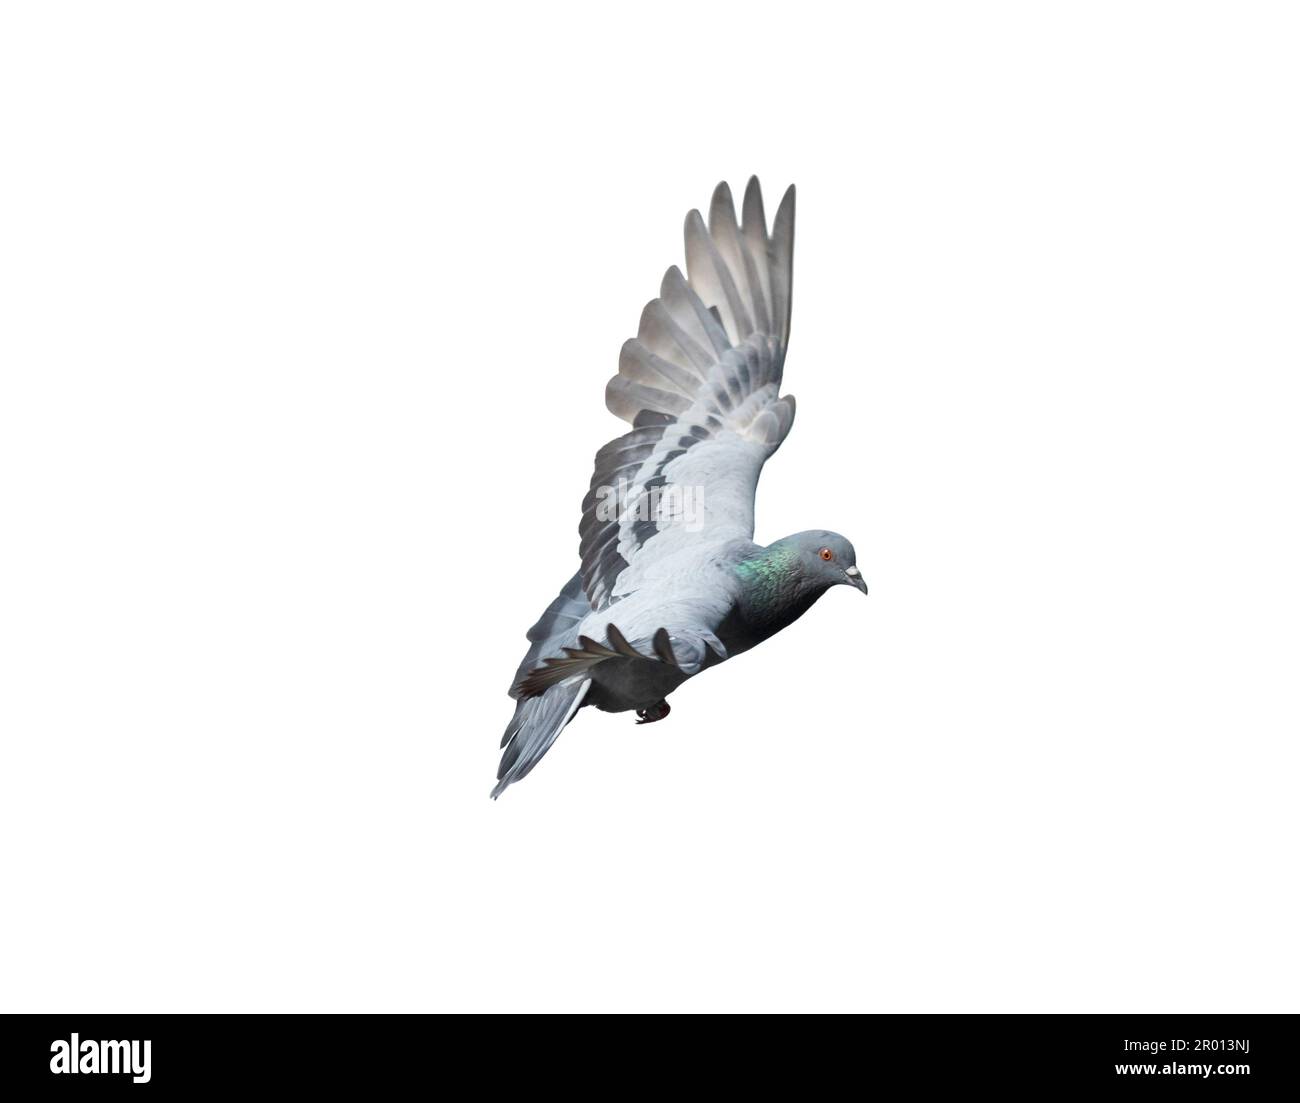 Flying pigeon in action isolated on white background. Grey pigeon in flight isolated. Side view of a dove flying isolated. Stock Photo